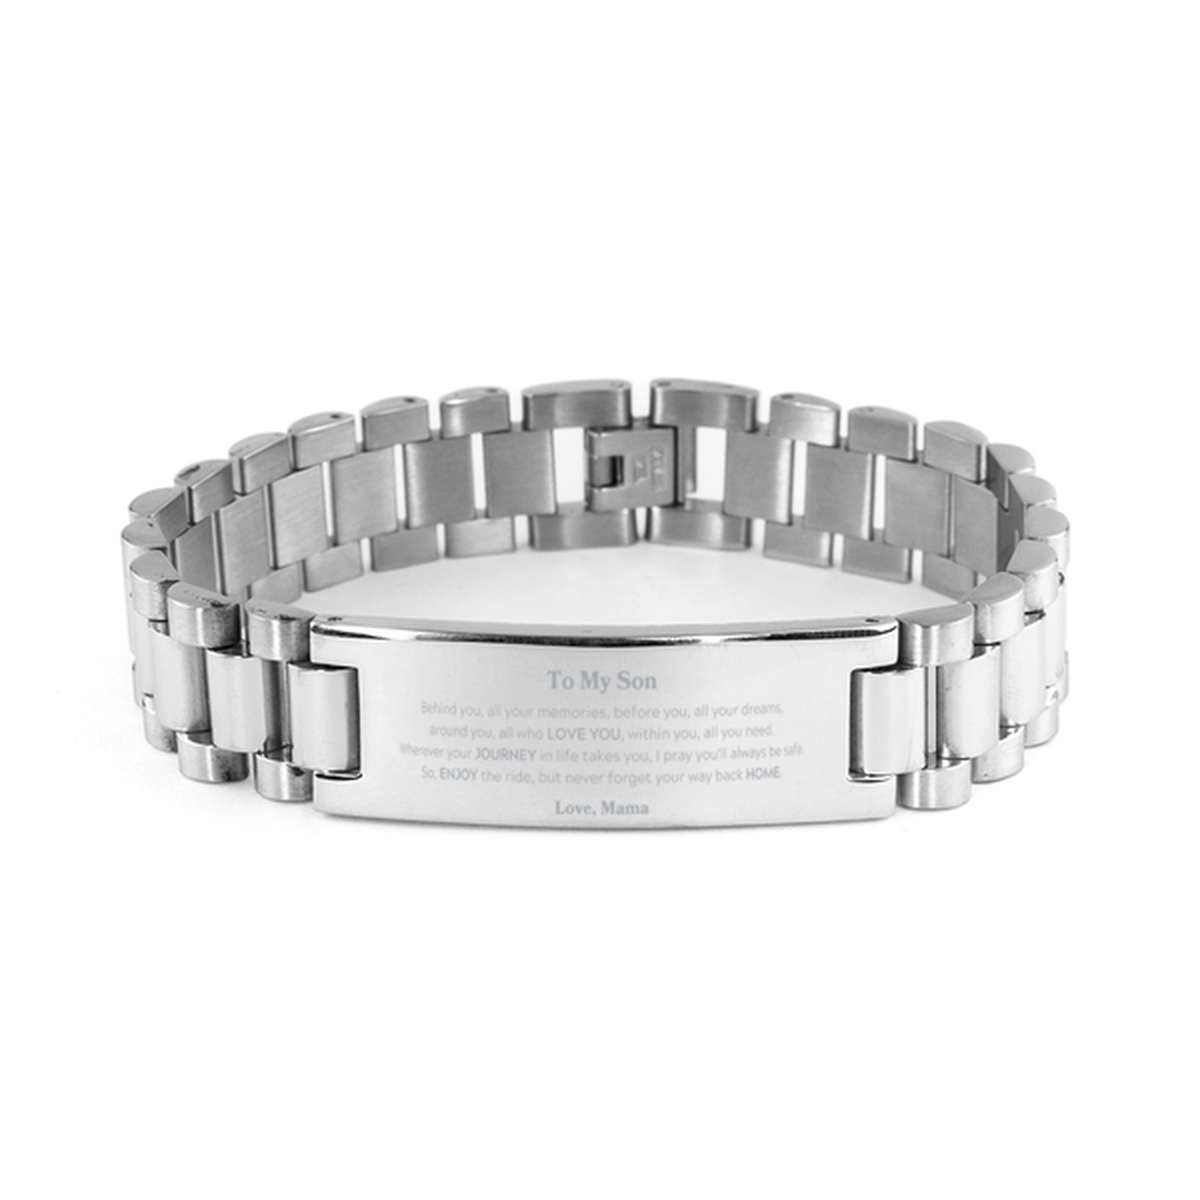 To My Son Graduation Gifts from Mama, Son Ladder Stainless Steel Bracelet Christmas Birthday Gifts for Son Behind you, all your memories, before you, all your dreams. Love, Mama